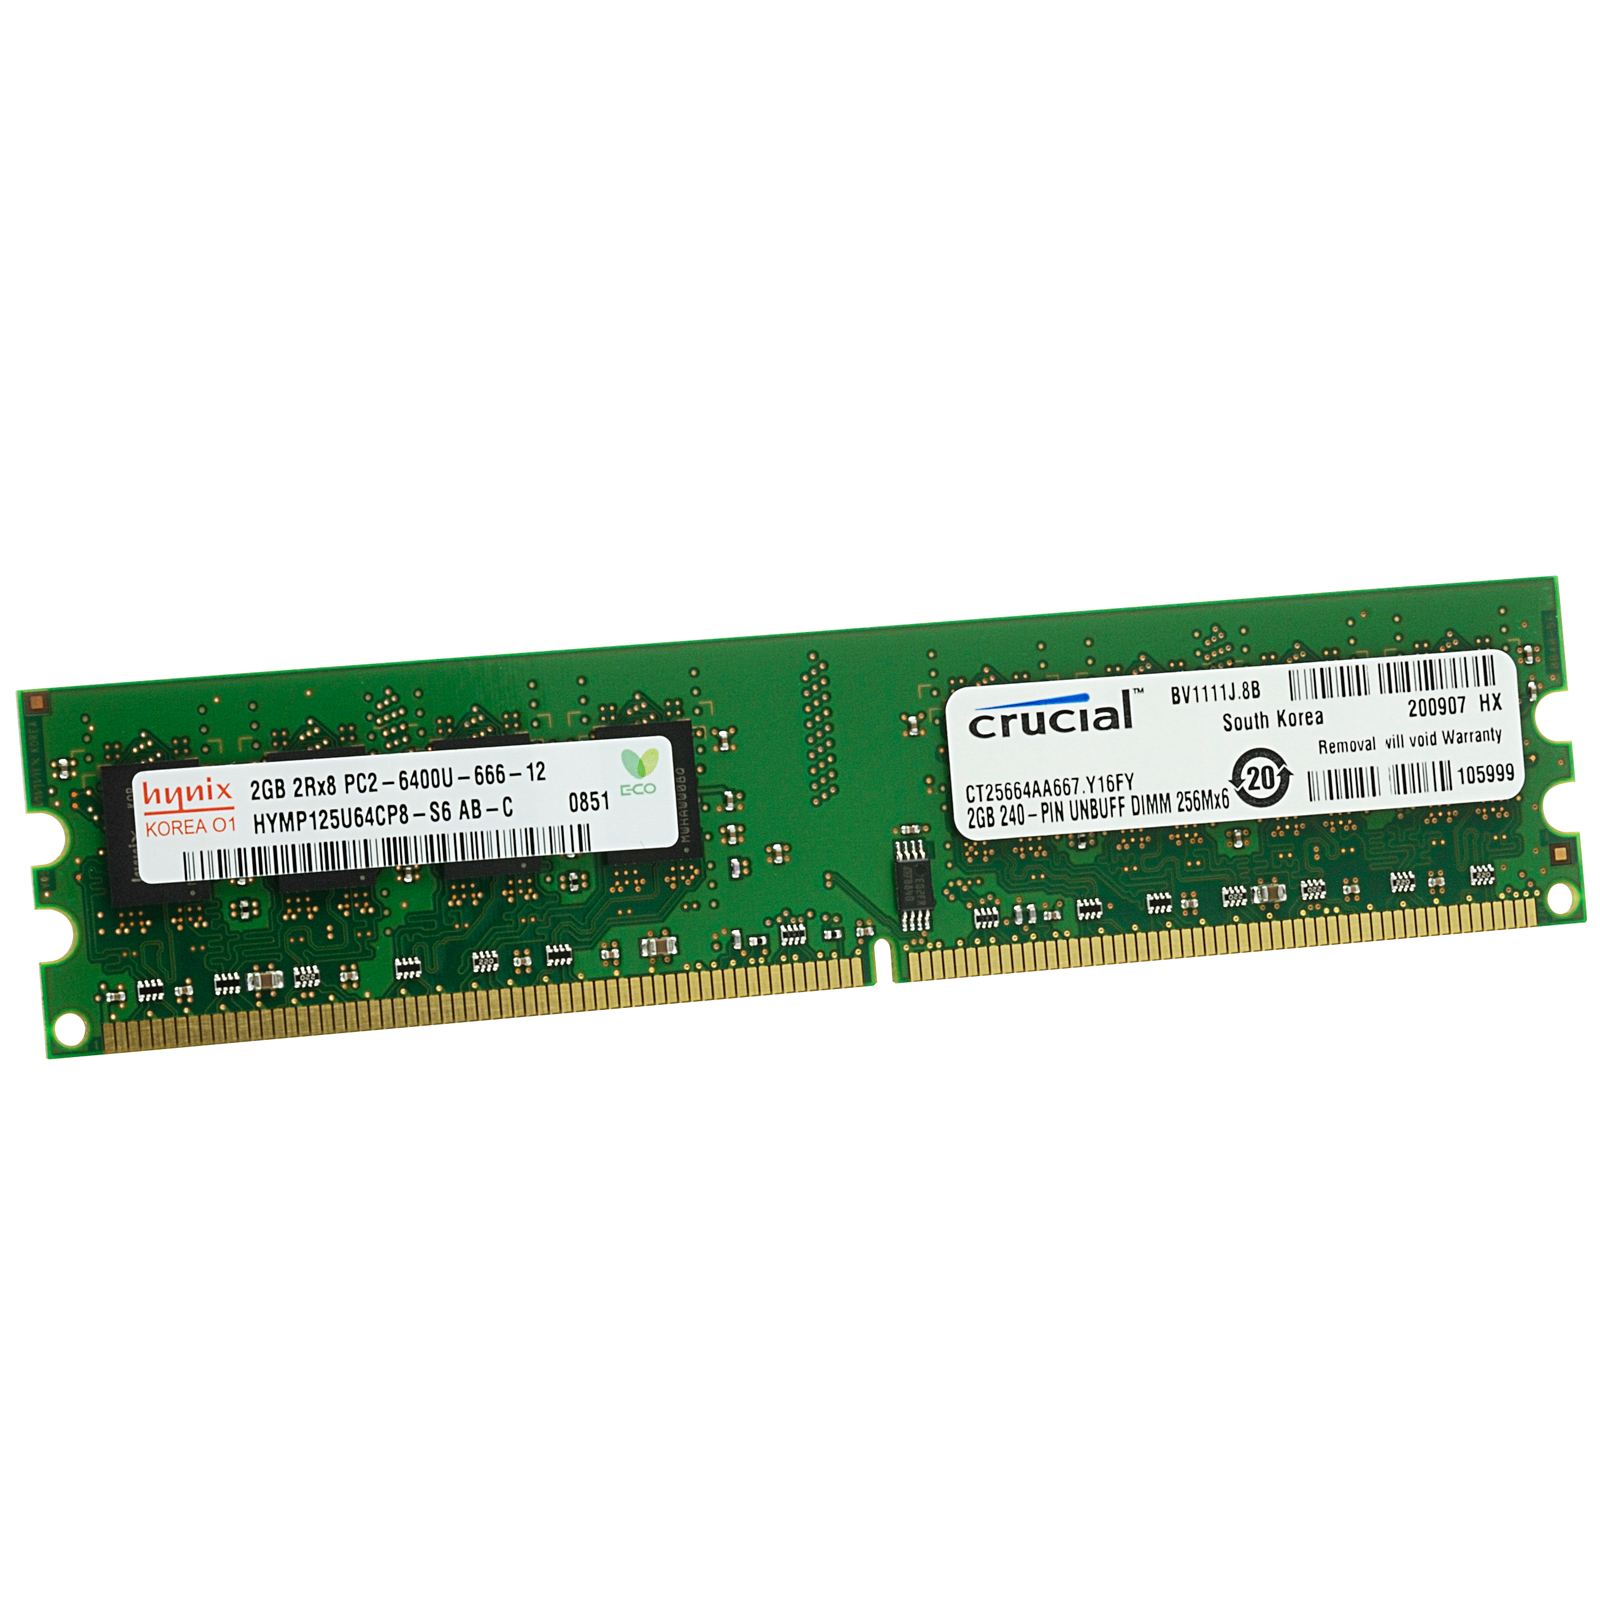 OFFTEK 512MB Replacement RAM Memory for Ei Systems 4415 PC2700 - Non-ECC Laptop Memory